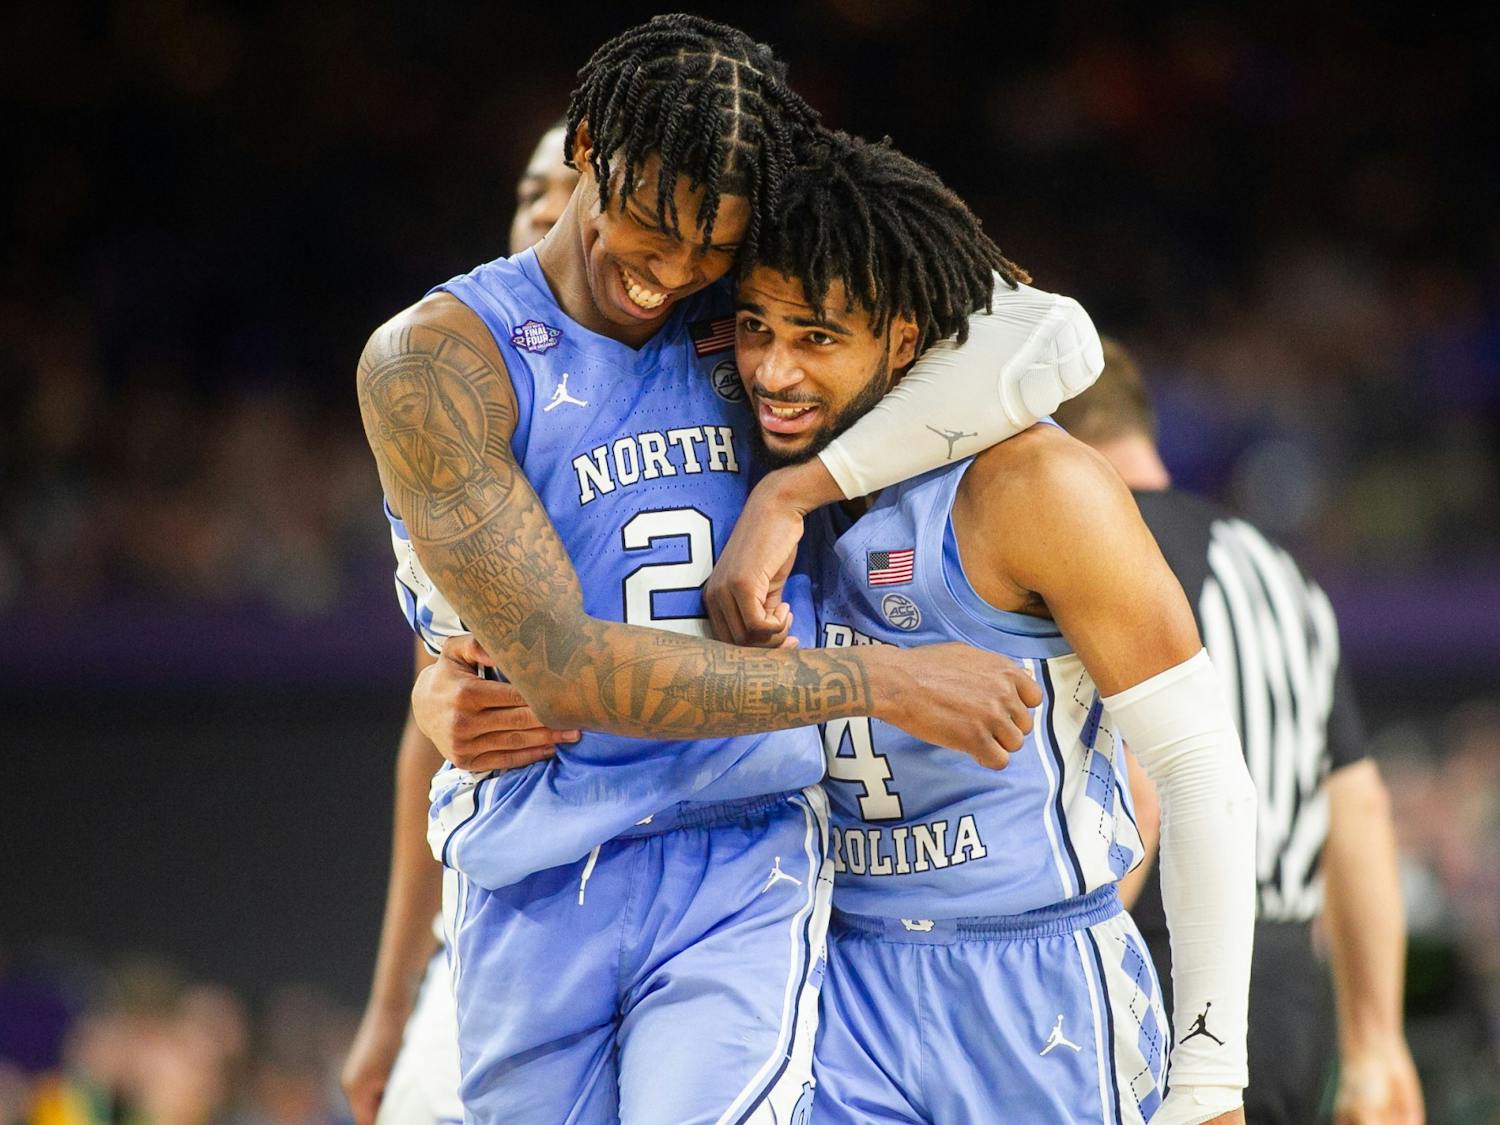 UNC sophomore guards Caleb Love (2) and RJ Davis (4) embrace after Love edged North Carolina forward with seconds left during the Final Four of the NCAA Tournament against Duke in New Orleans on Saturday, April 2, 2022. UNC won 81-77.